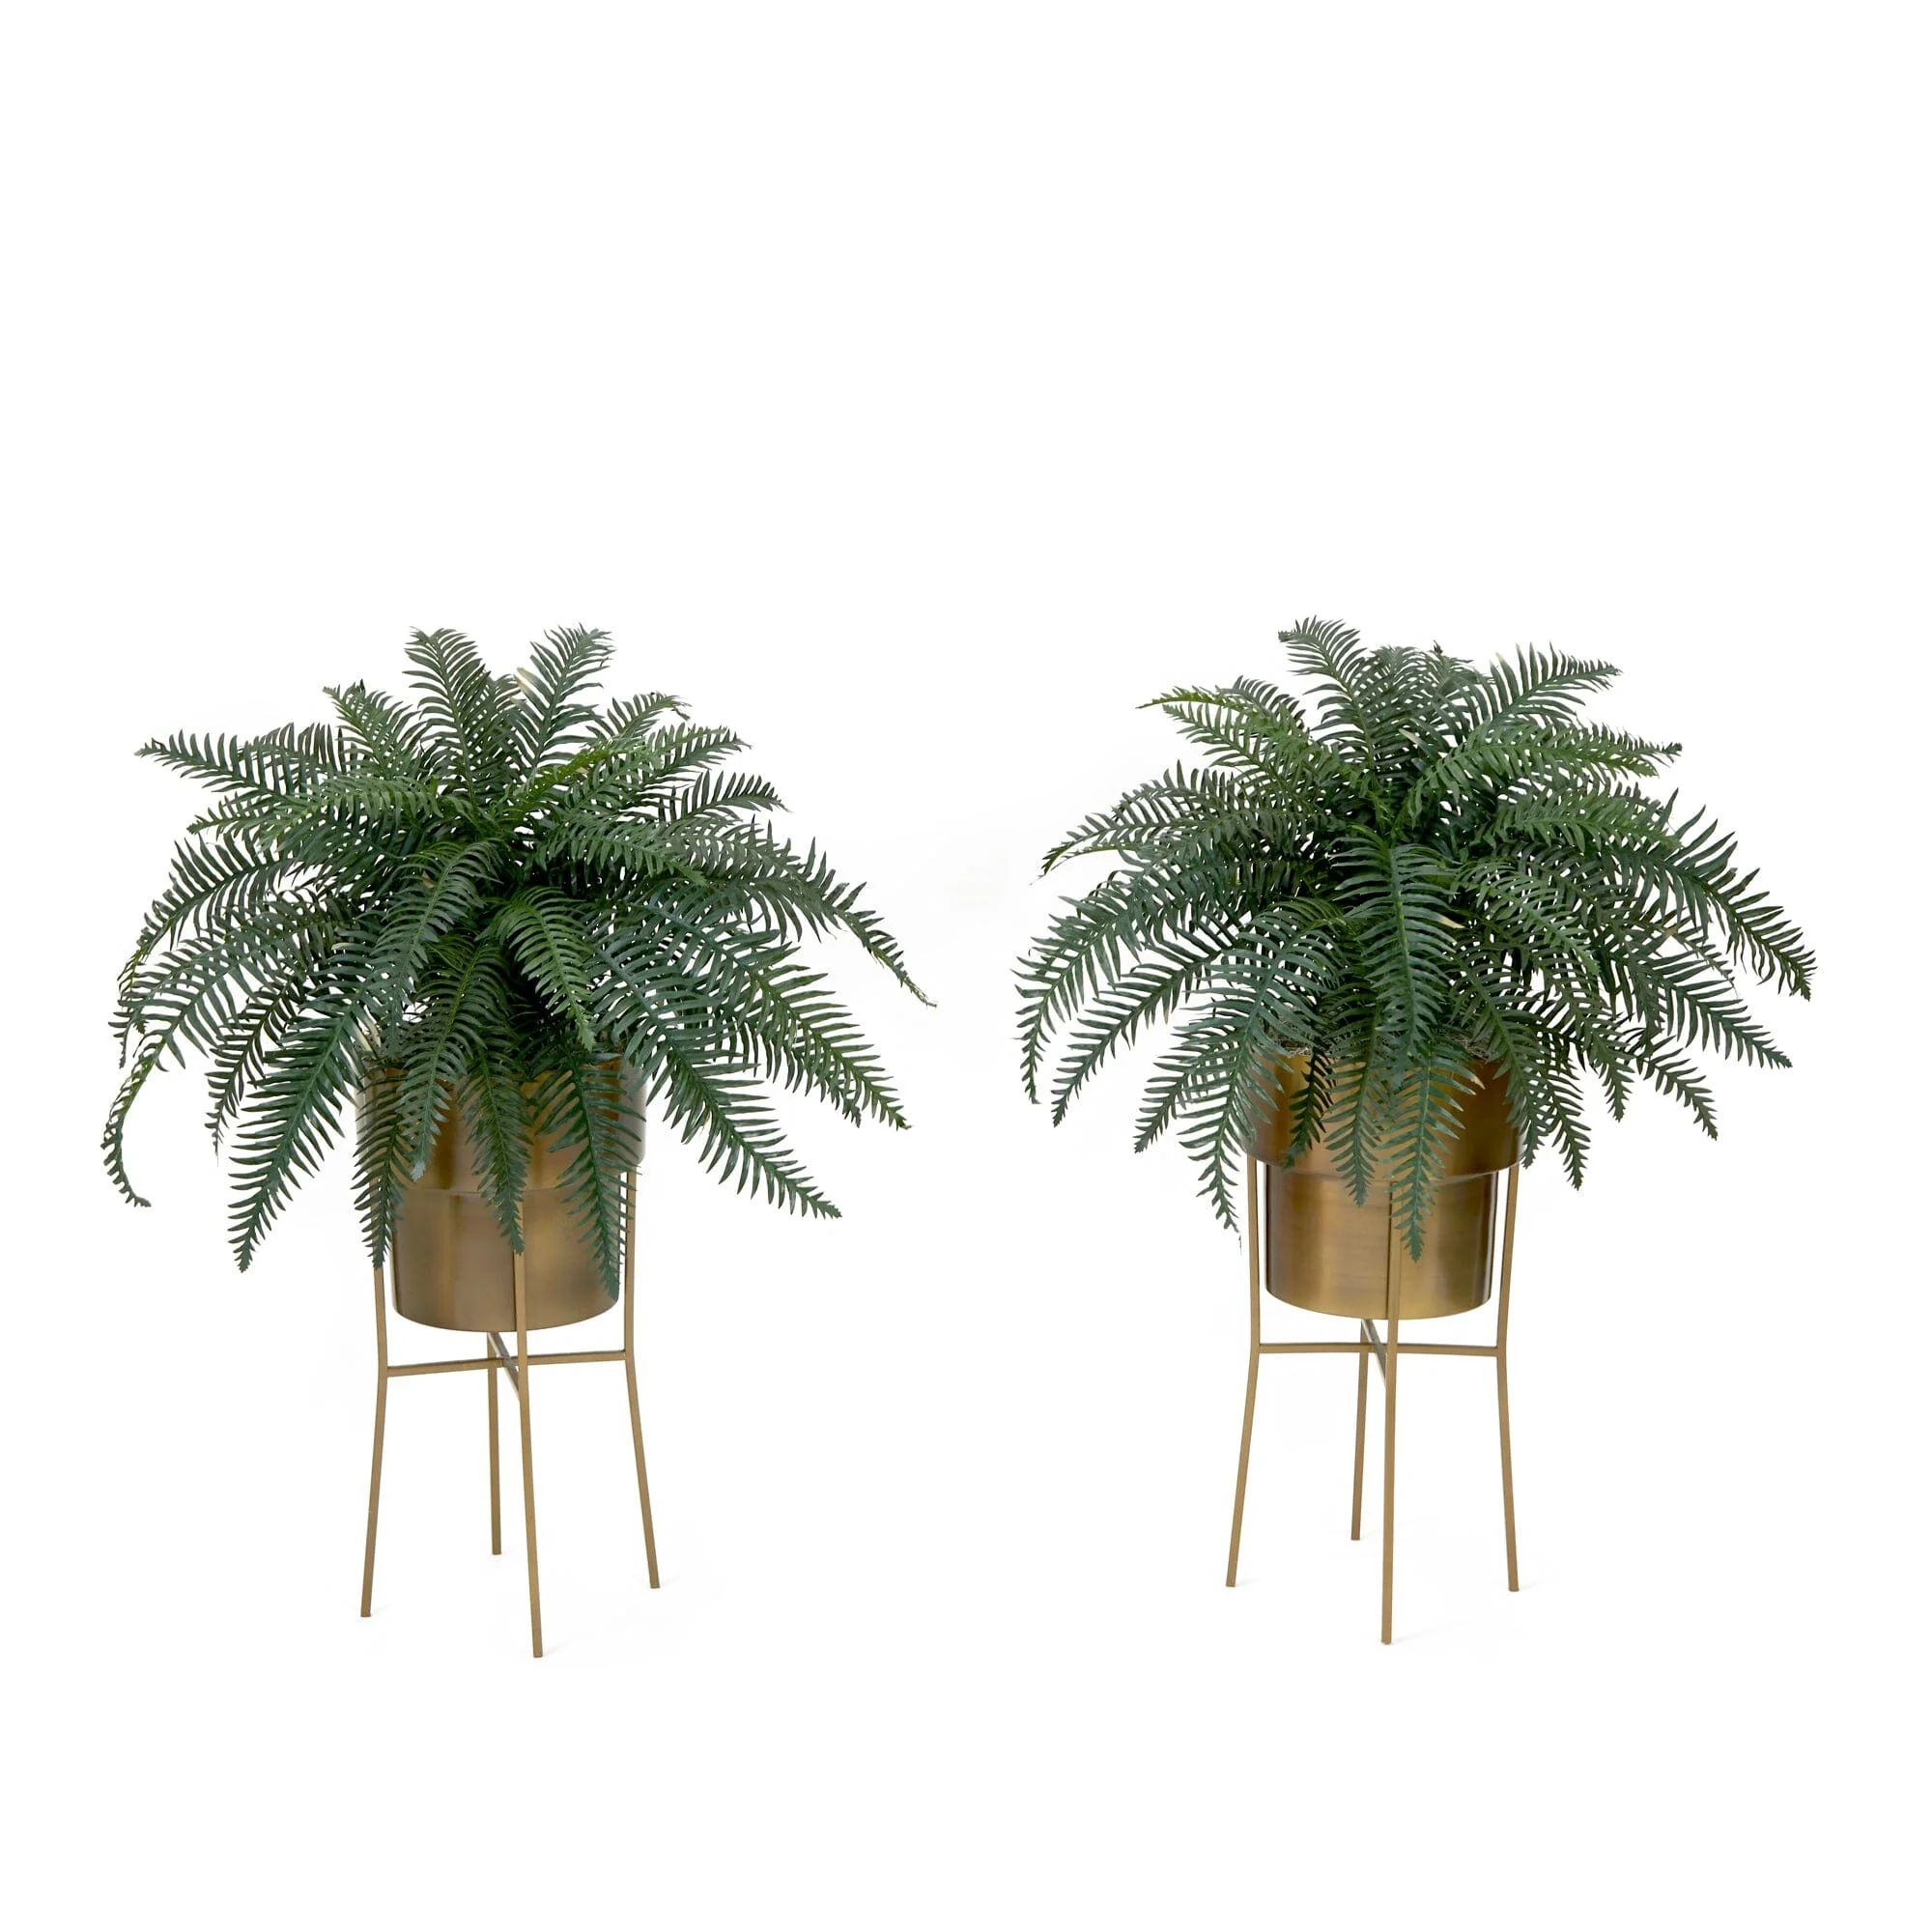 34” Artificial River Fern Plant in Metal Planter with Stand DIY KIT - Set of 2 | Nearly Natural | Nearly Natural